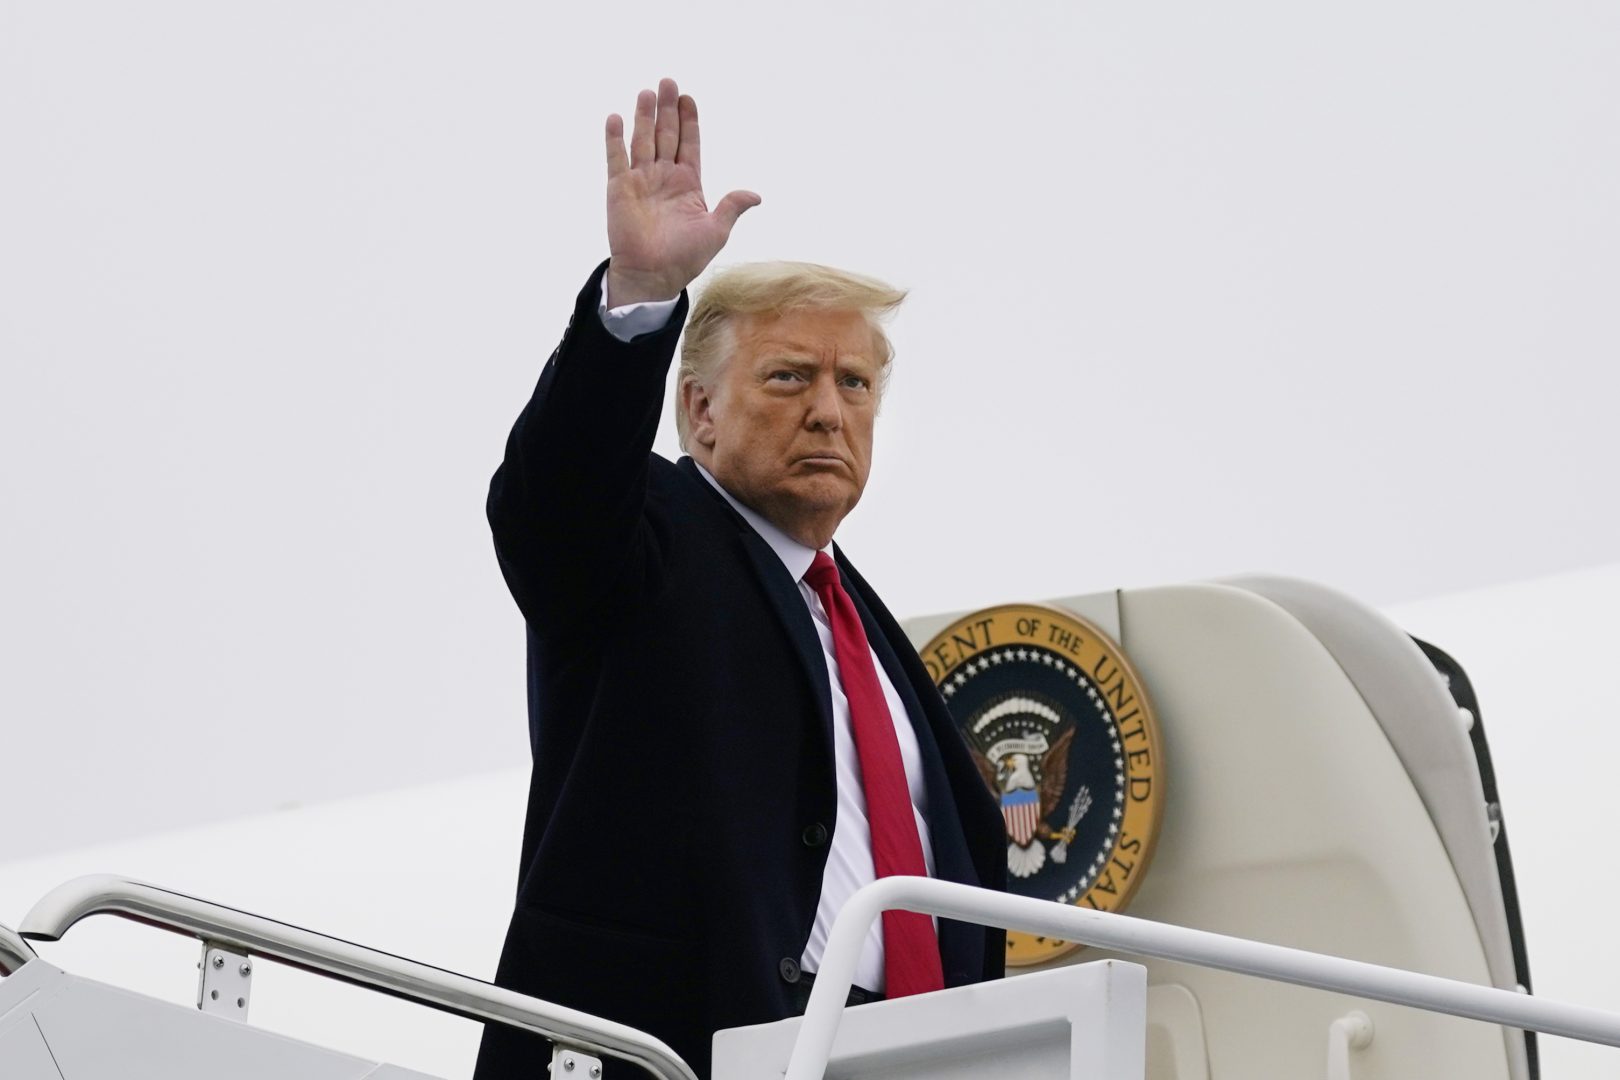 President Donald Trump waves as he boards Air Force One upon departure Monday, Oct. 26, 2020, at Andrews Air Force Base, Md., as he heads to Pennsylvania for campaign rallies.